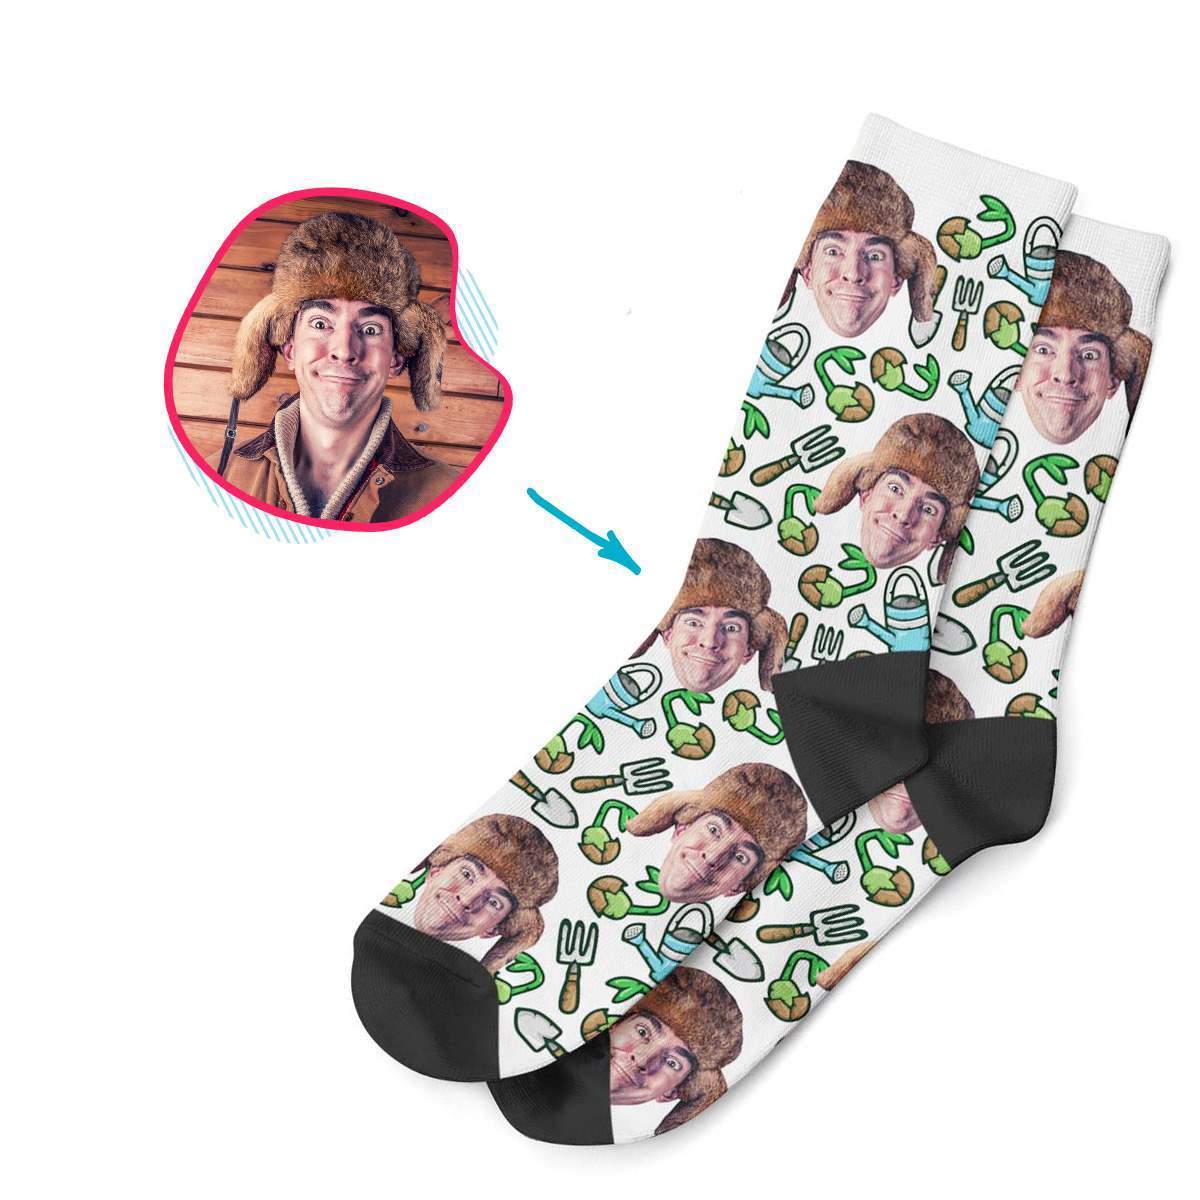 white Gardening socks personalized with photo of face printed on them